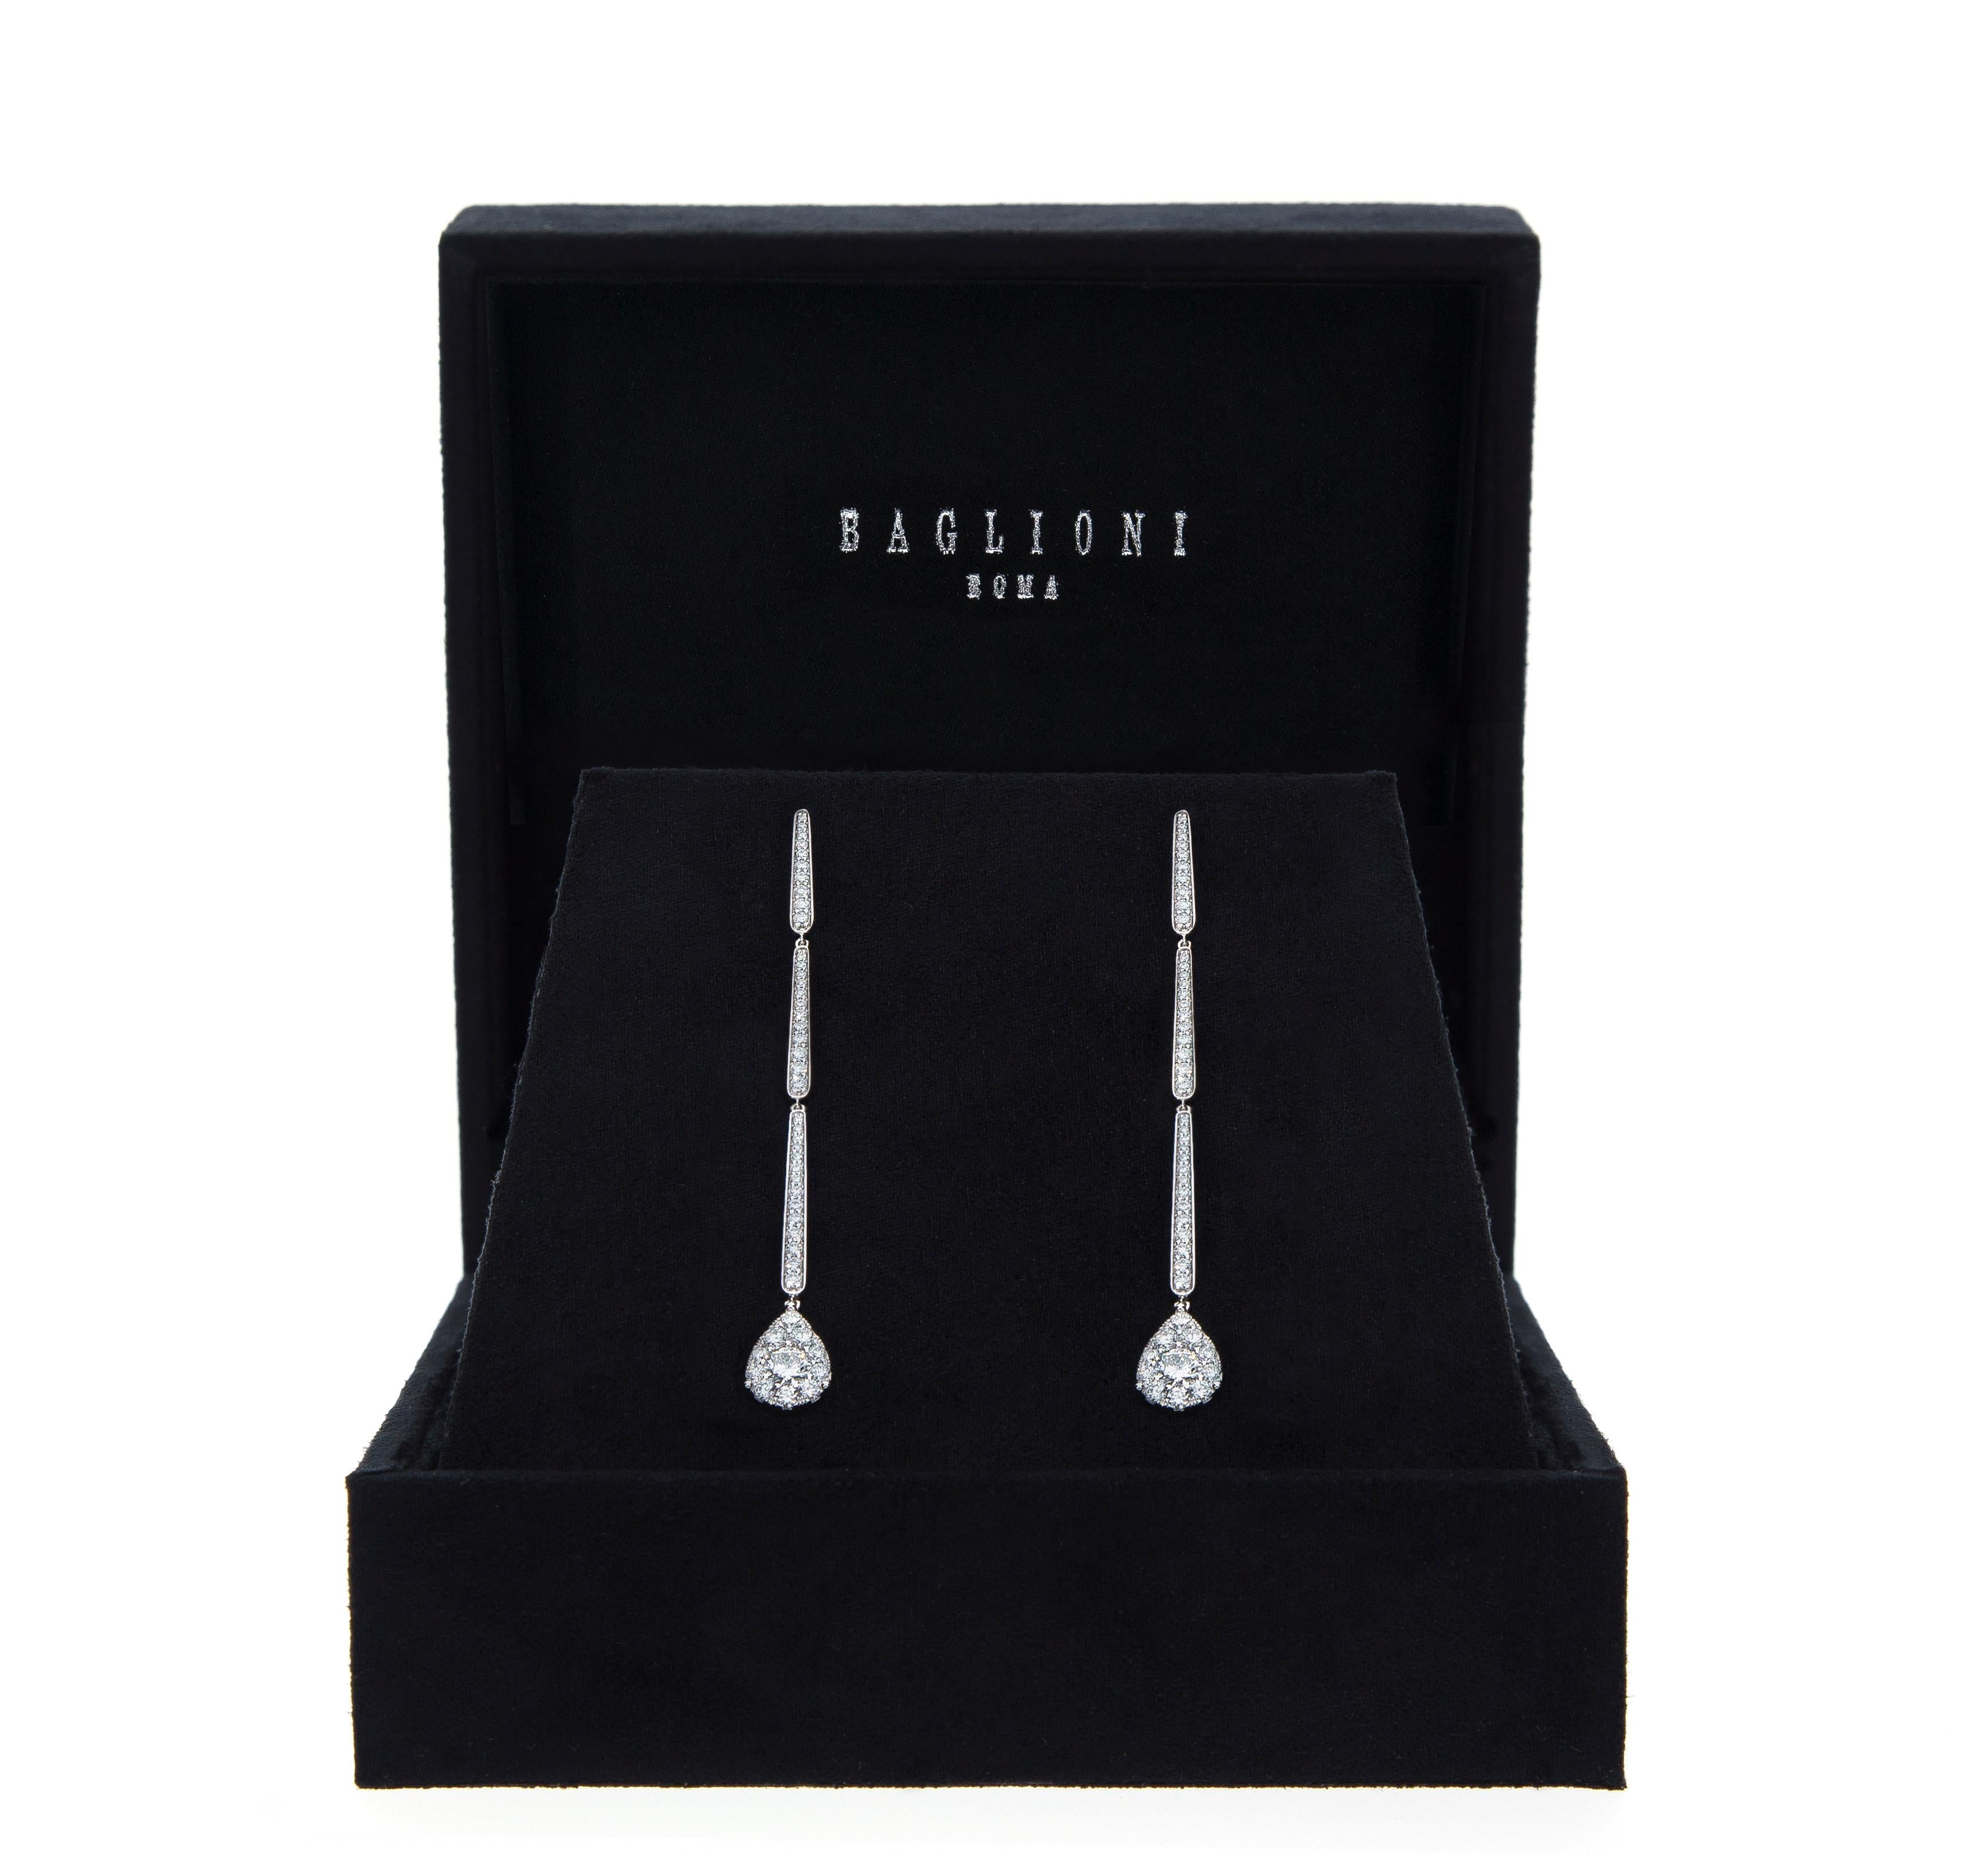 18Kt white gold pendant earrings with 94 diamonds
Total Weight 1.50 ct
Each earring is made up of three mobile segments on which brilliant-cut diamonds are set in gradation, in the final part of the drop-shaped earring there are pave diamonds with a